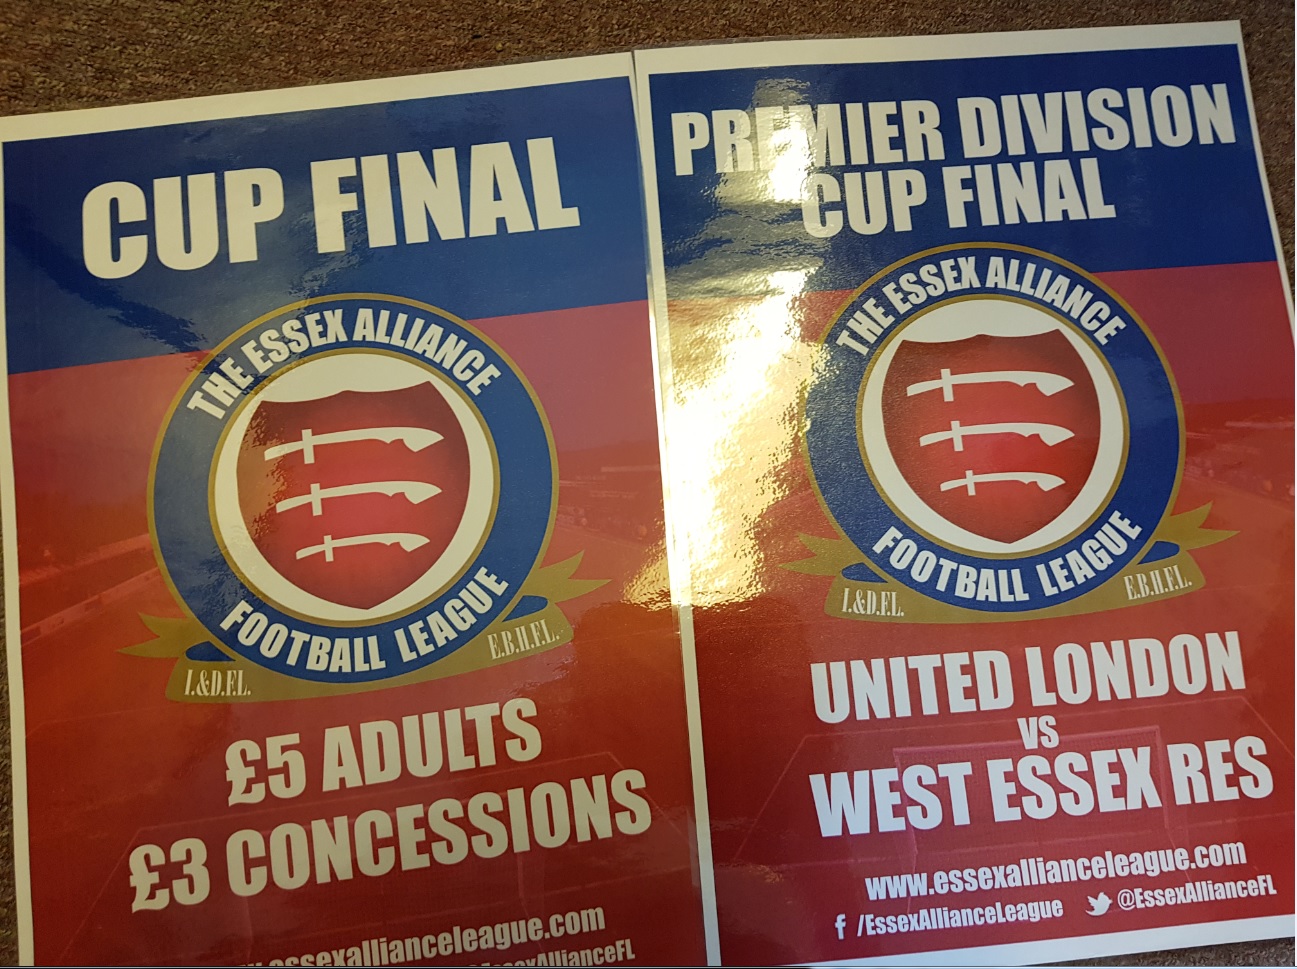 PREVIEW: United London and West Essex Reserves meet in Premier Division Cup Final